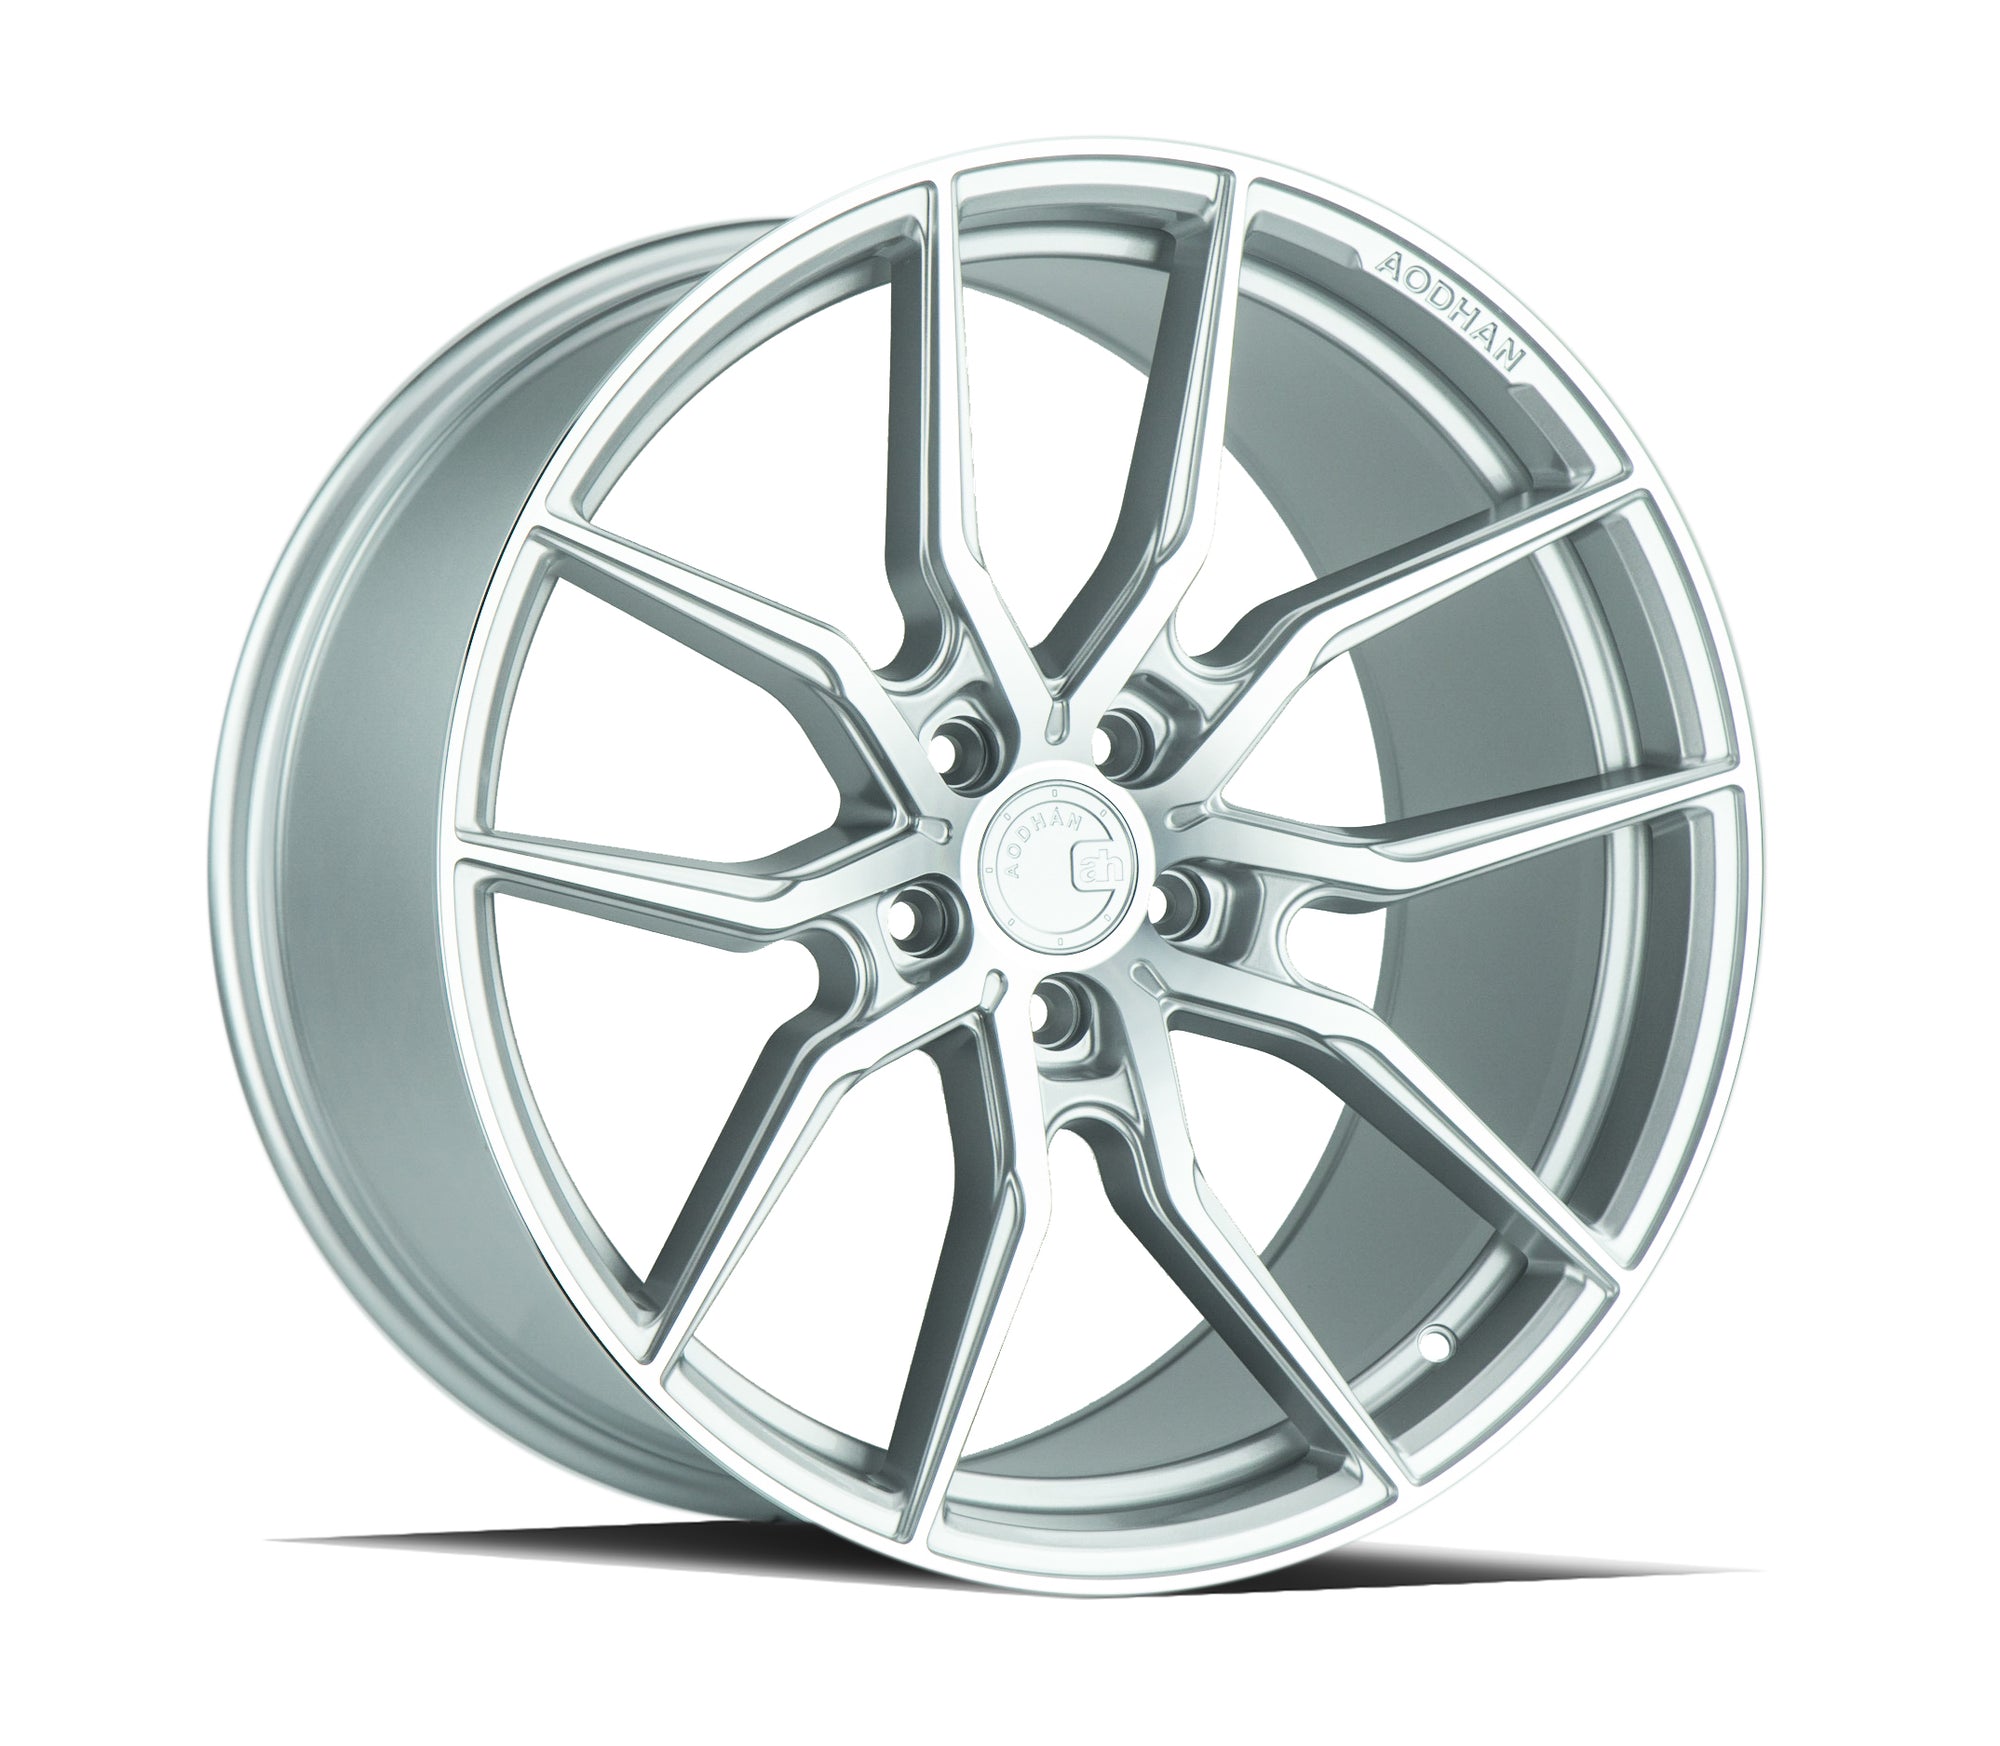 Aodhan AFF1 20x10.5 5x114.3 +45 Gloss Silver Machined Face